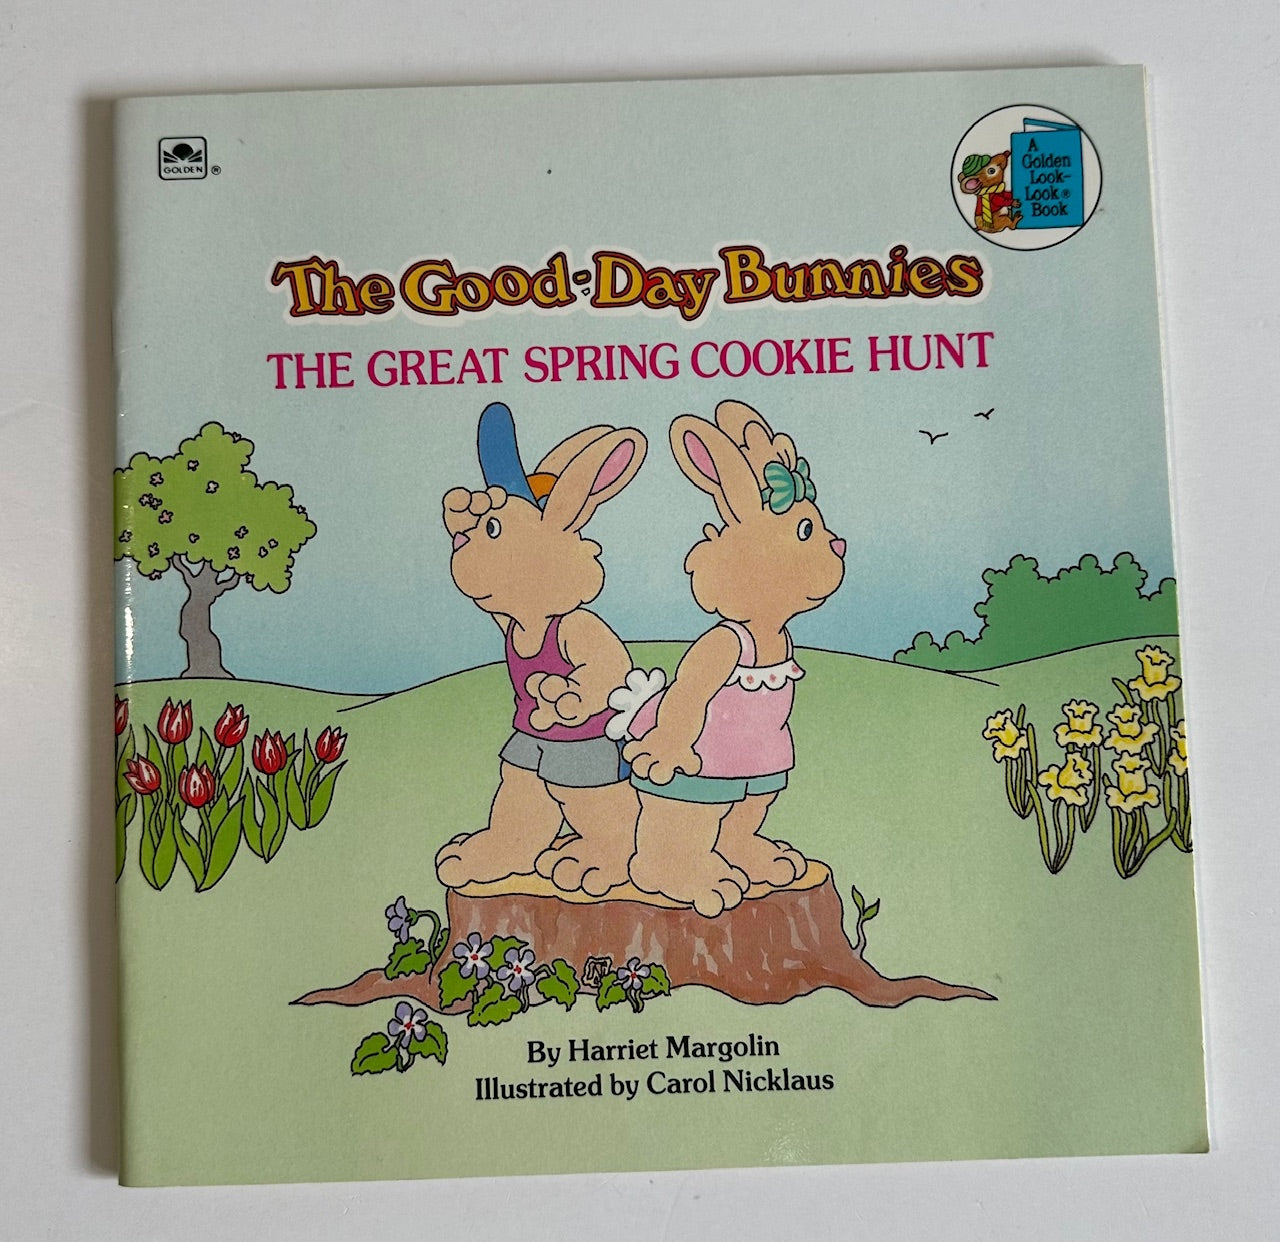 "The Good-Day Bunnies: The Great Spring Cookie Hunt"